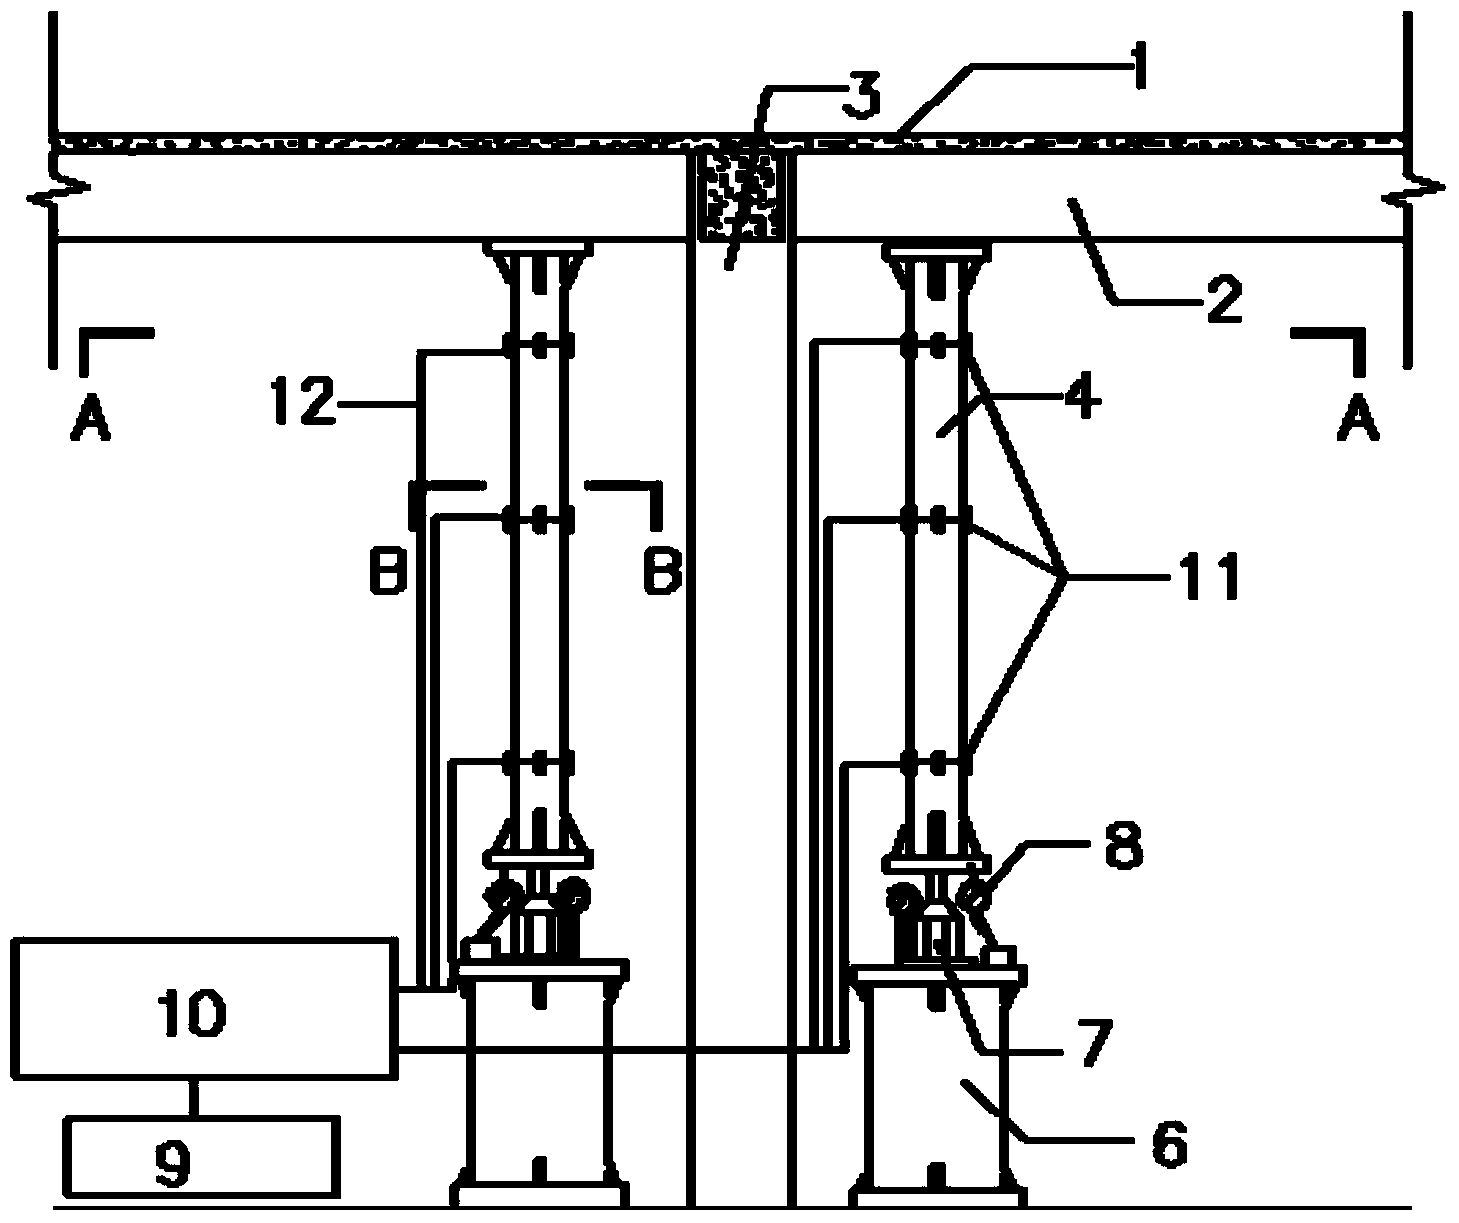 Safe and reliable construction system for replacing columns by sustaining beams supported by columns and construction method for replacing columns by sustaining beams supported by columns